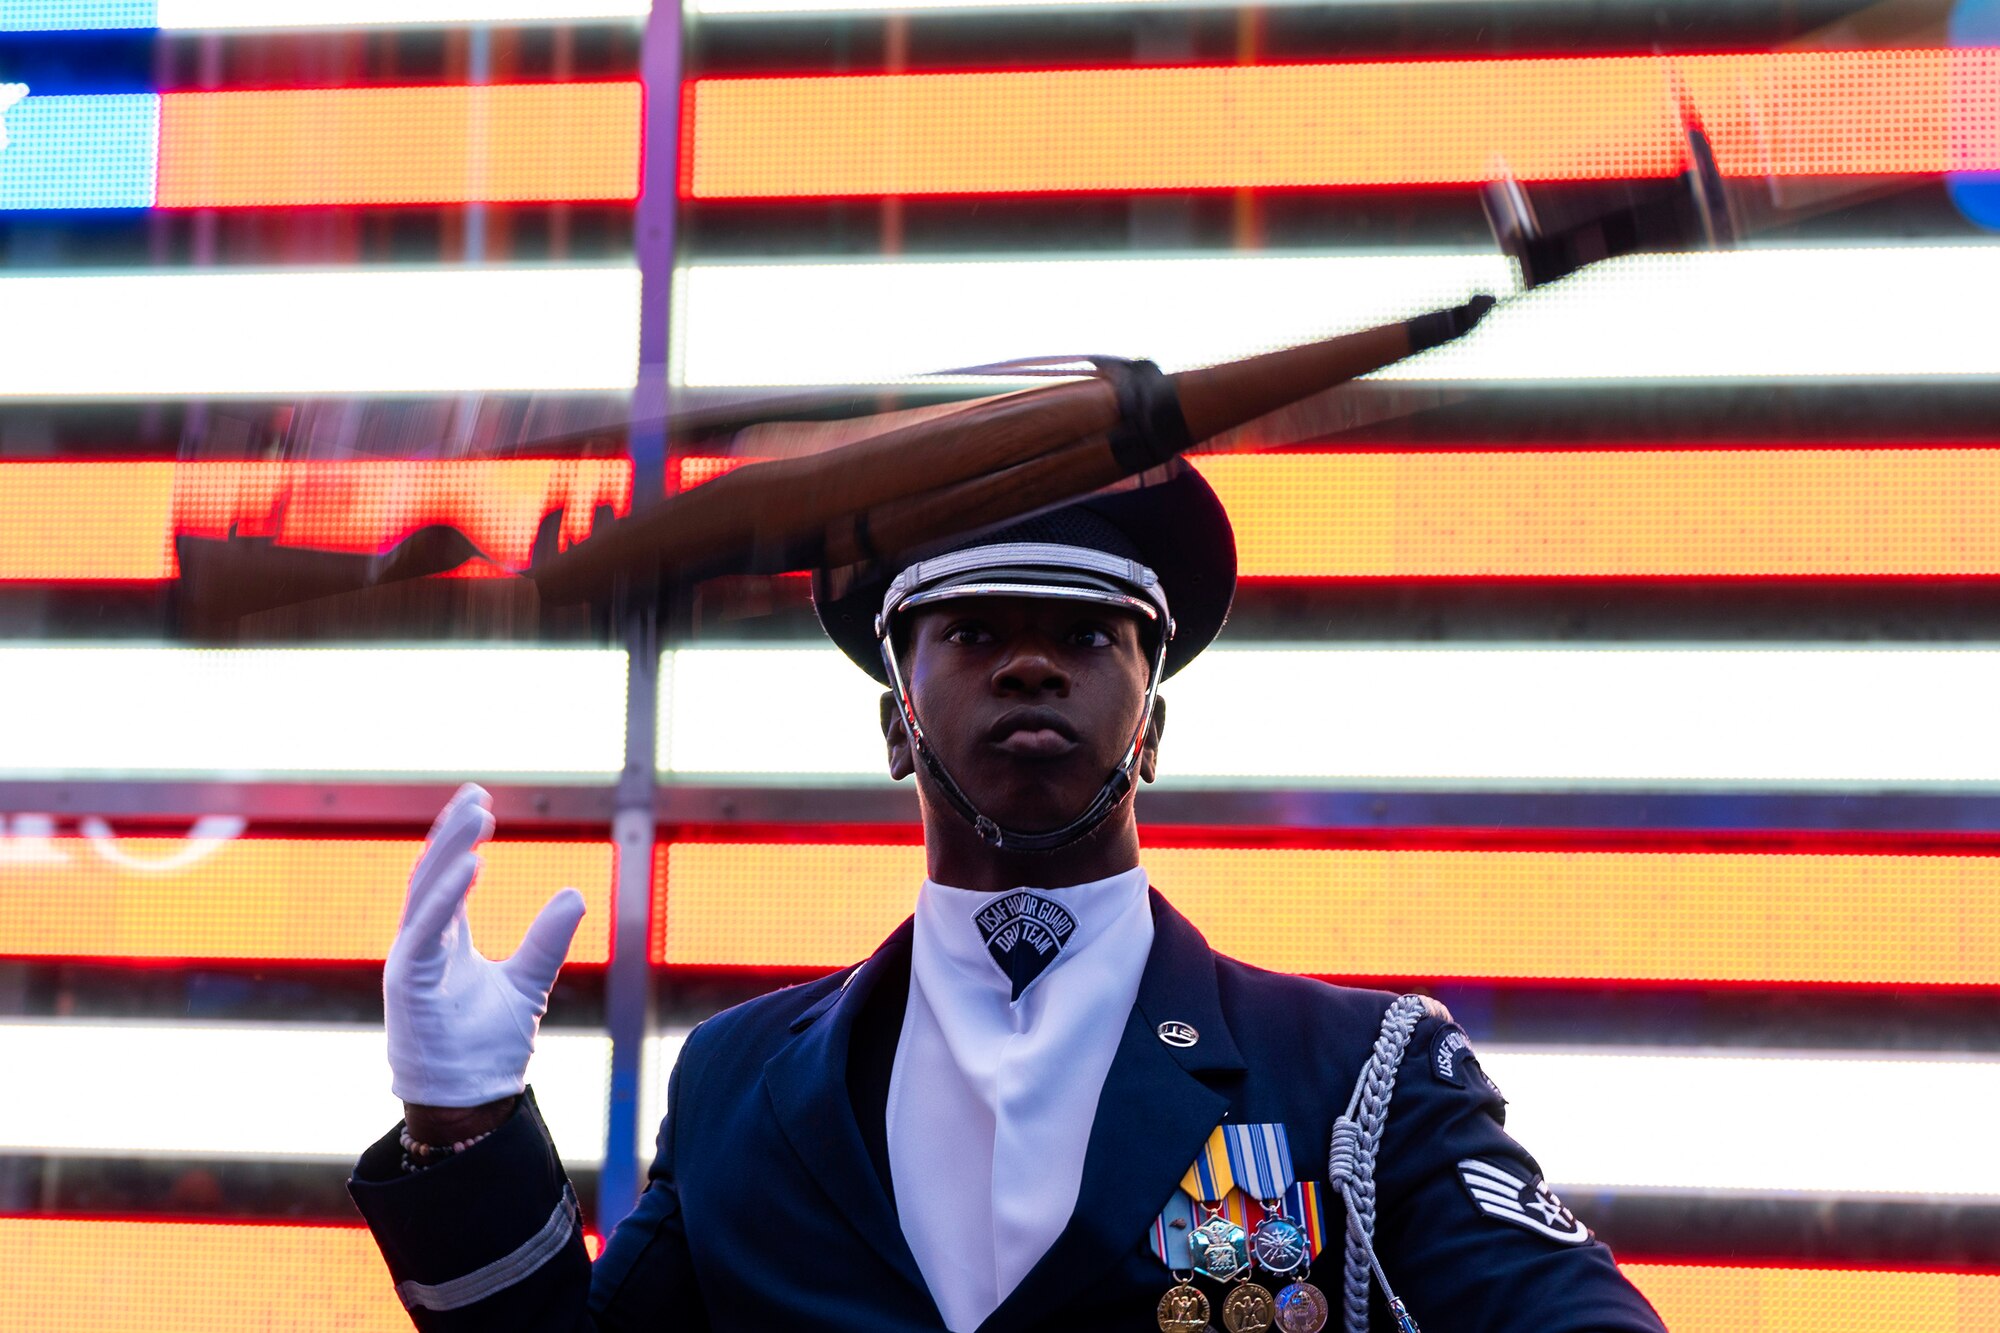 Staff Sgt. Marcus Hardy, U.S. Air Force Honor Guard drill team member, warms up